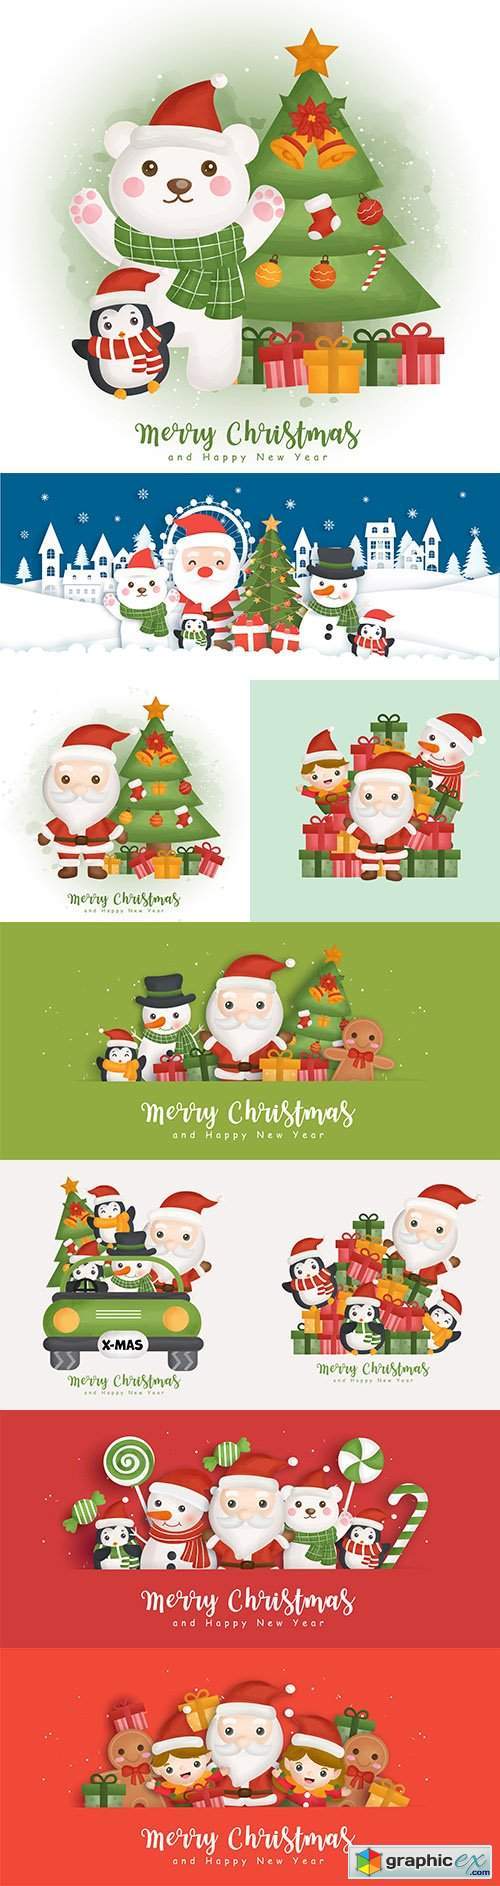 Merry Christmas background with Santa Claus elements and friends